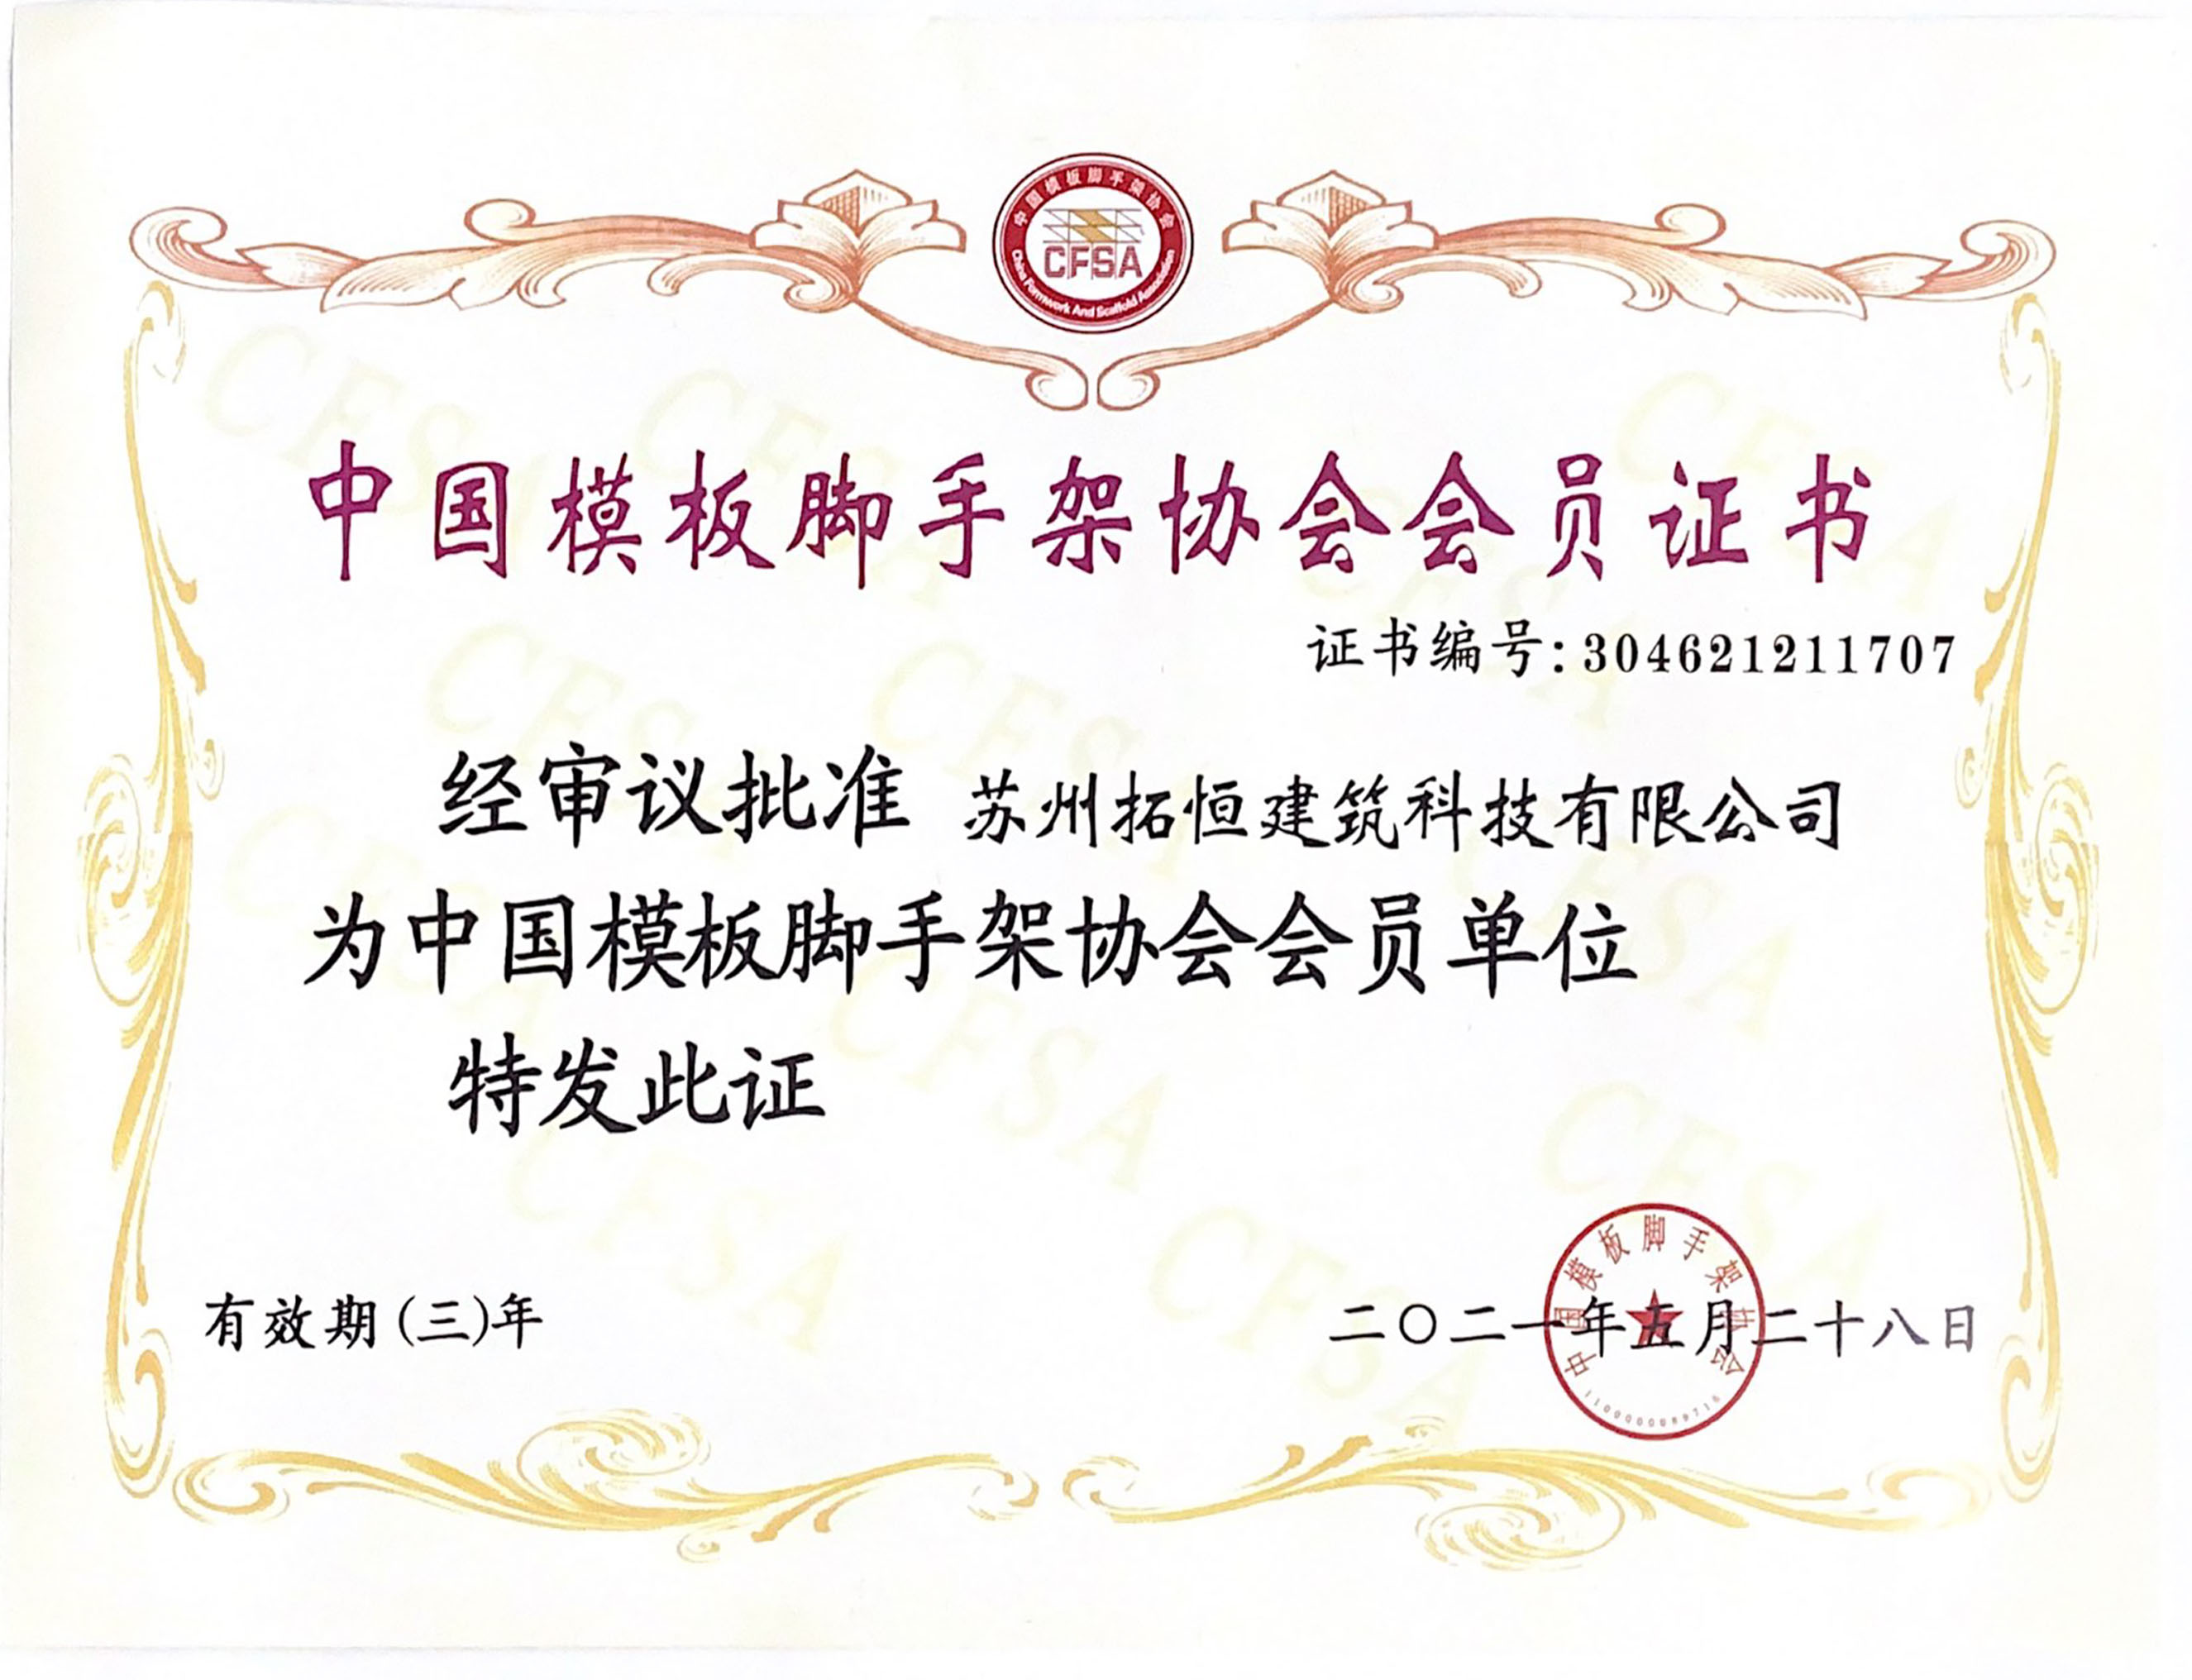 Membership certificate of China Formwork And Scaffold Association